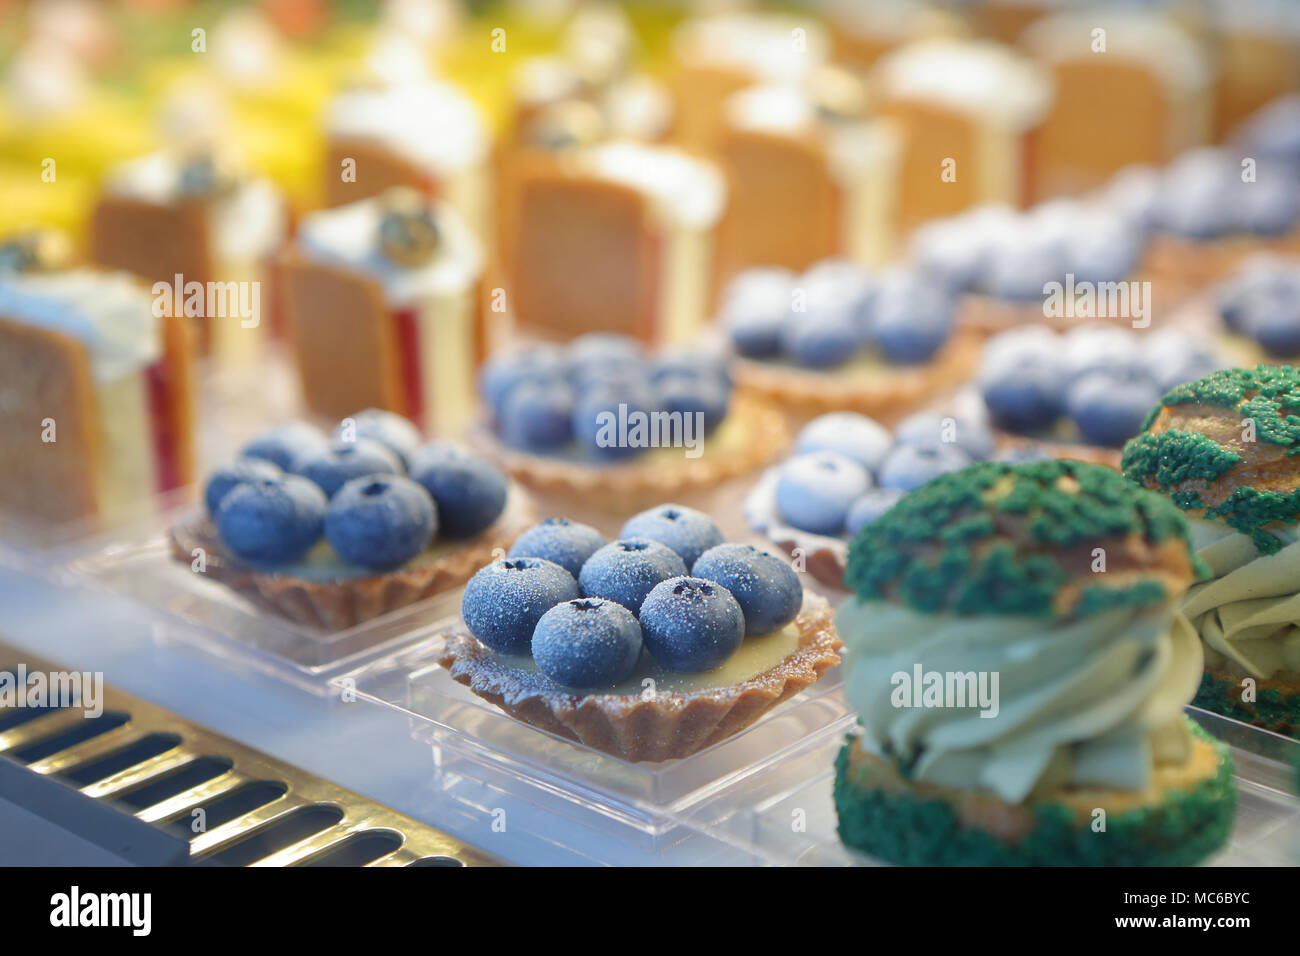 Catering set cookies in pastry shop Stock Photo